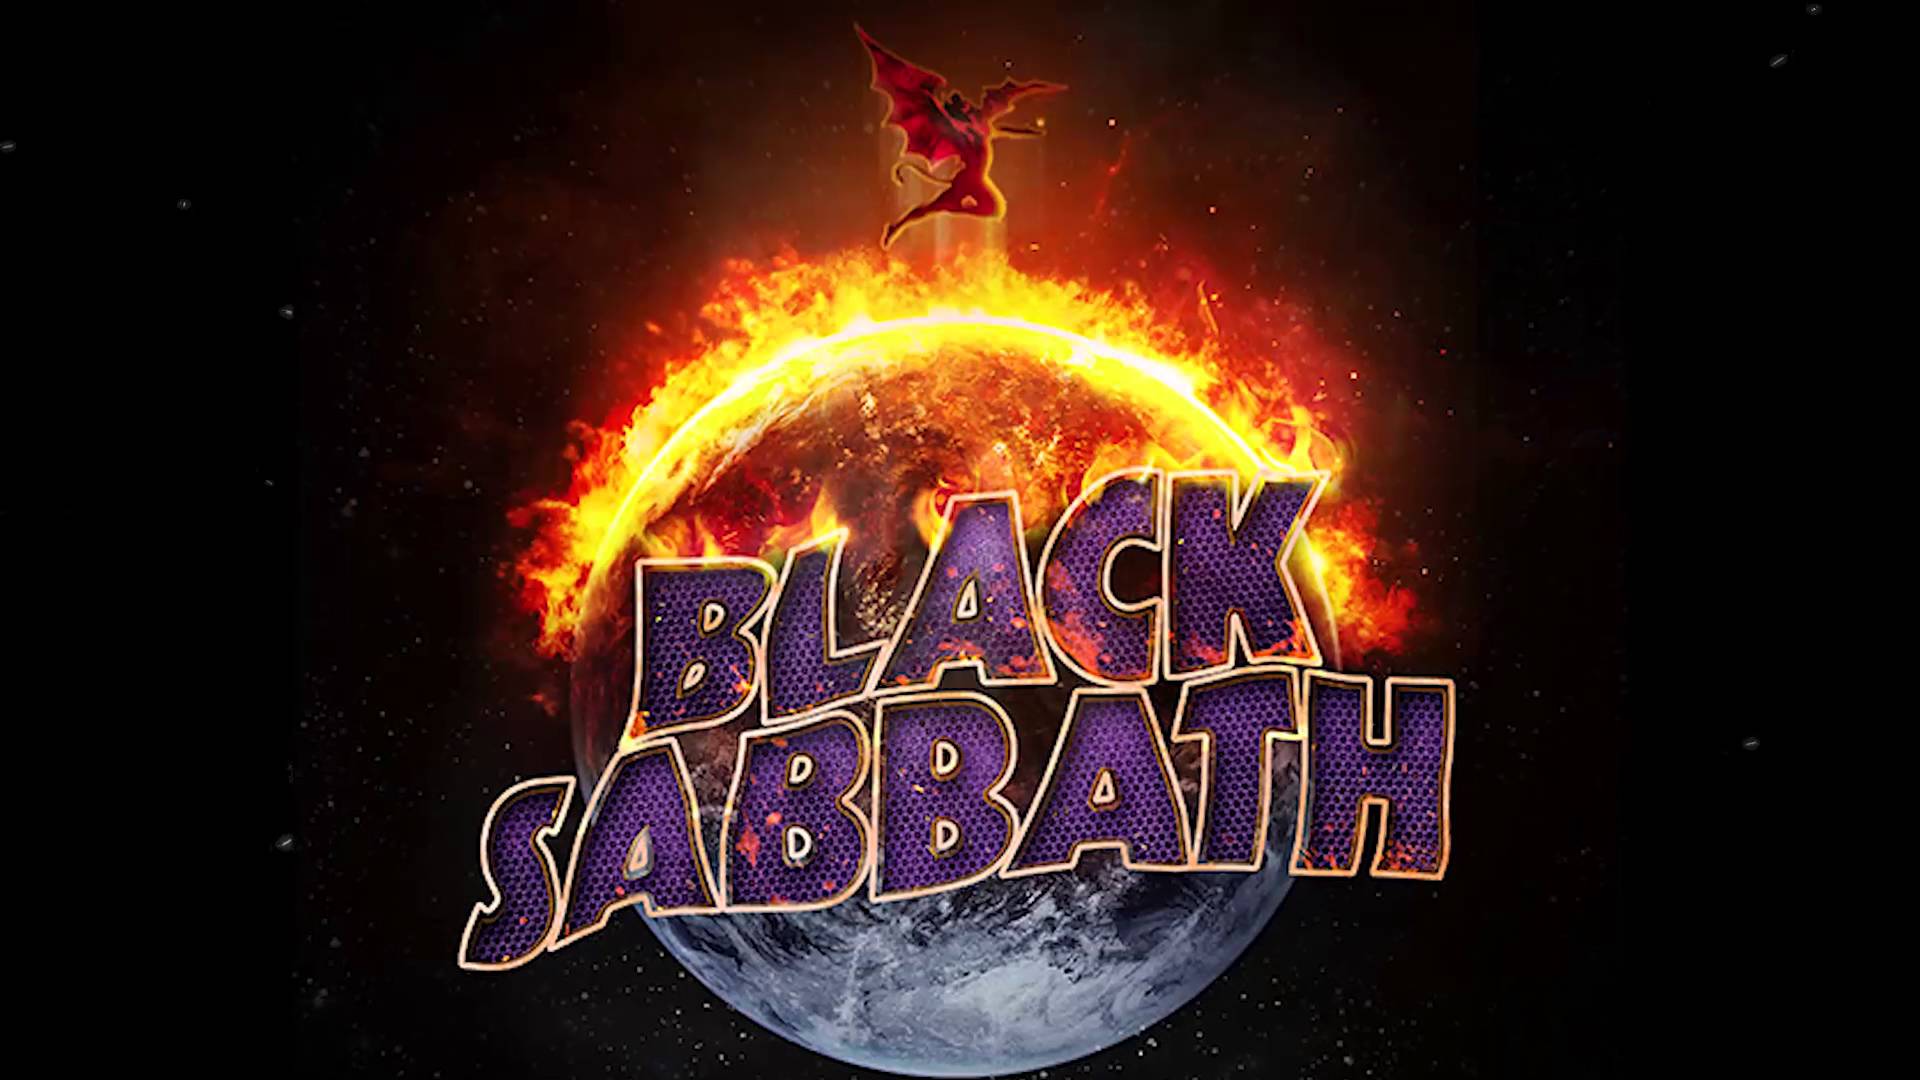 Black Sabbath unveil teaser from The End Tour rehearsals confirming